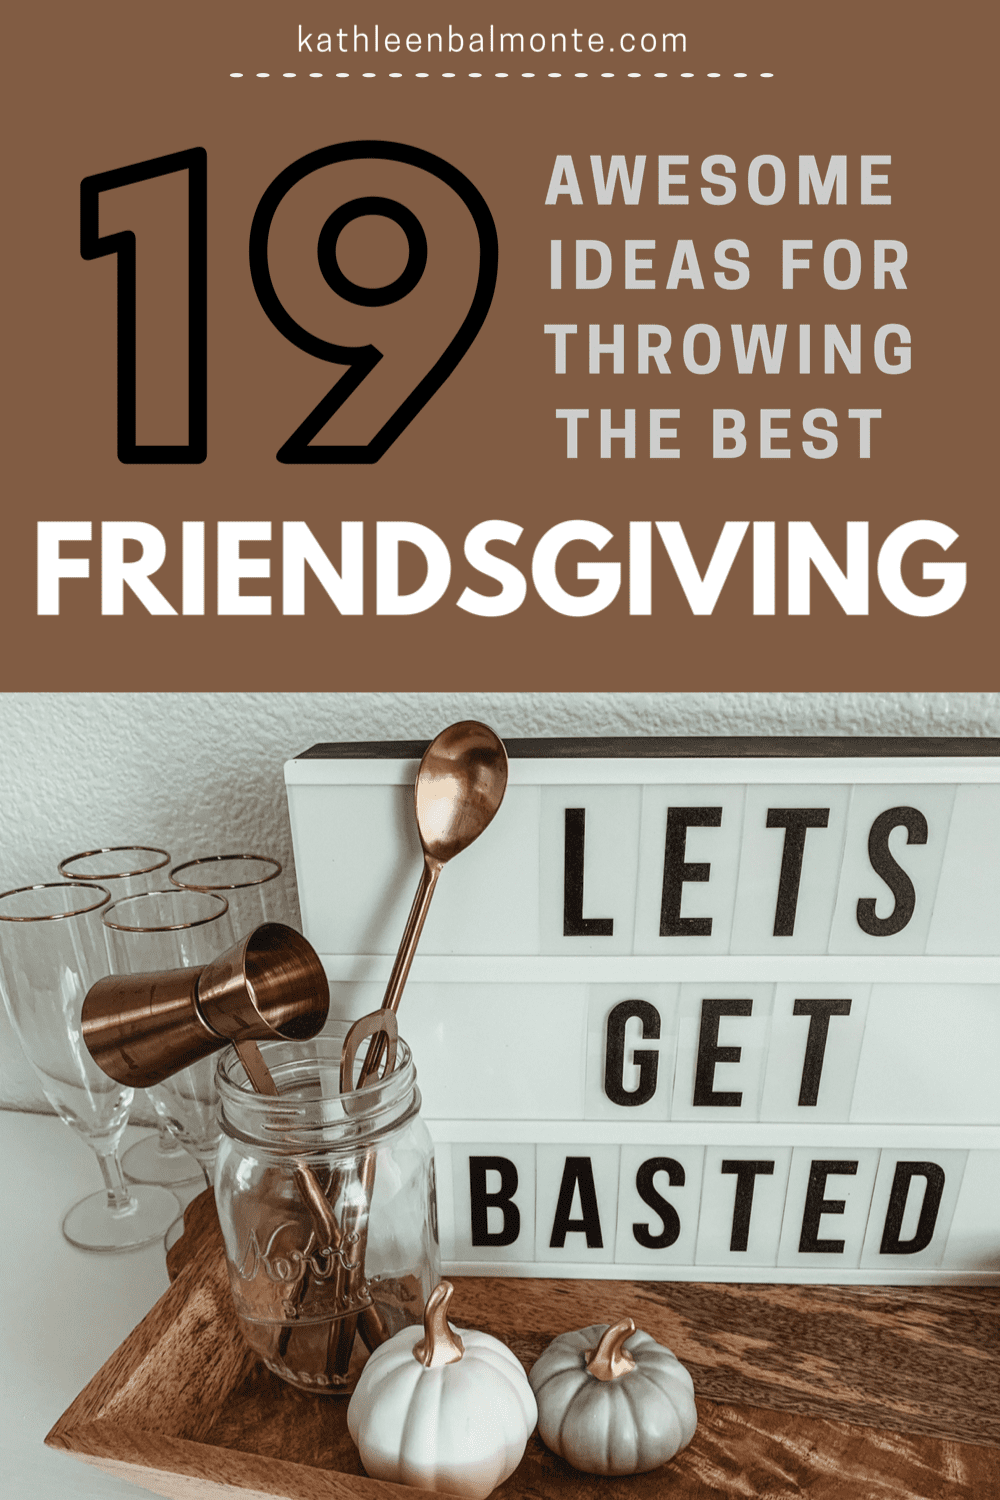 19 Friendsgiving Ideas For Throwing The Best Party Ever - Kathleen Balmonte